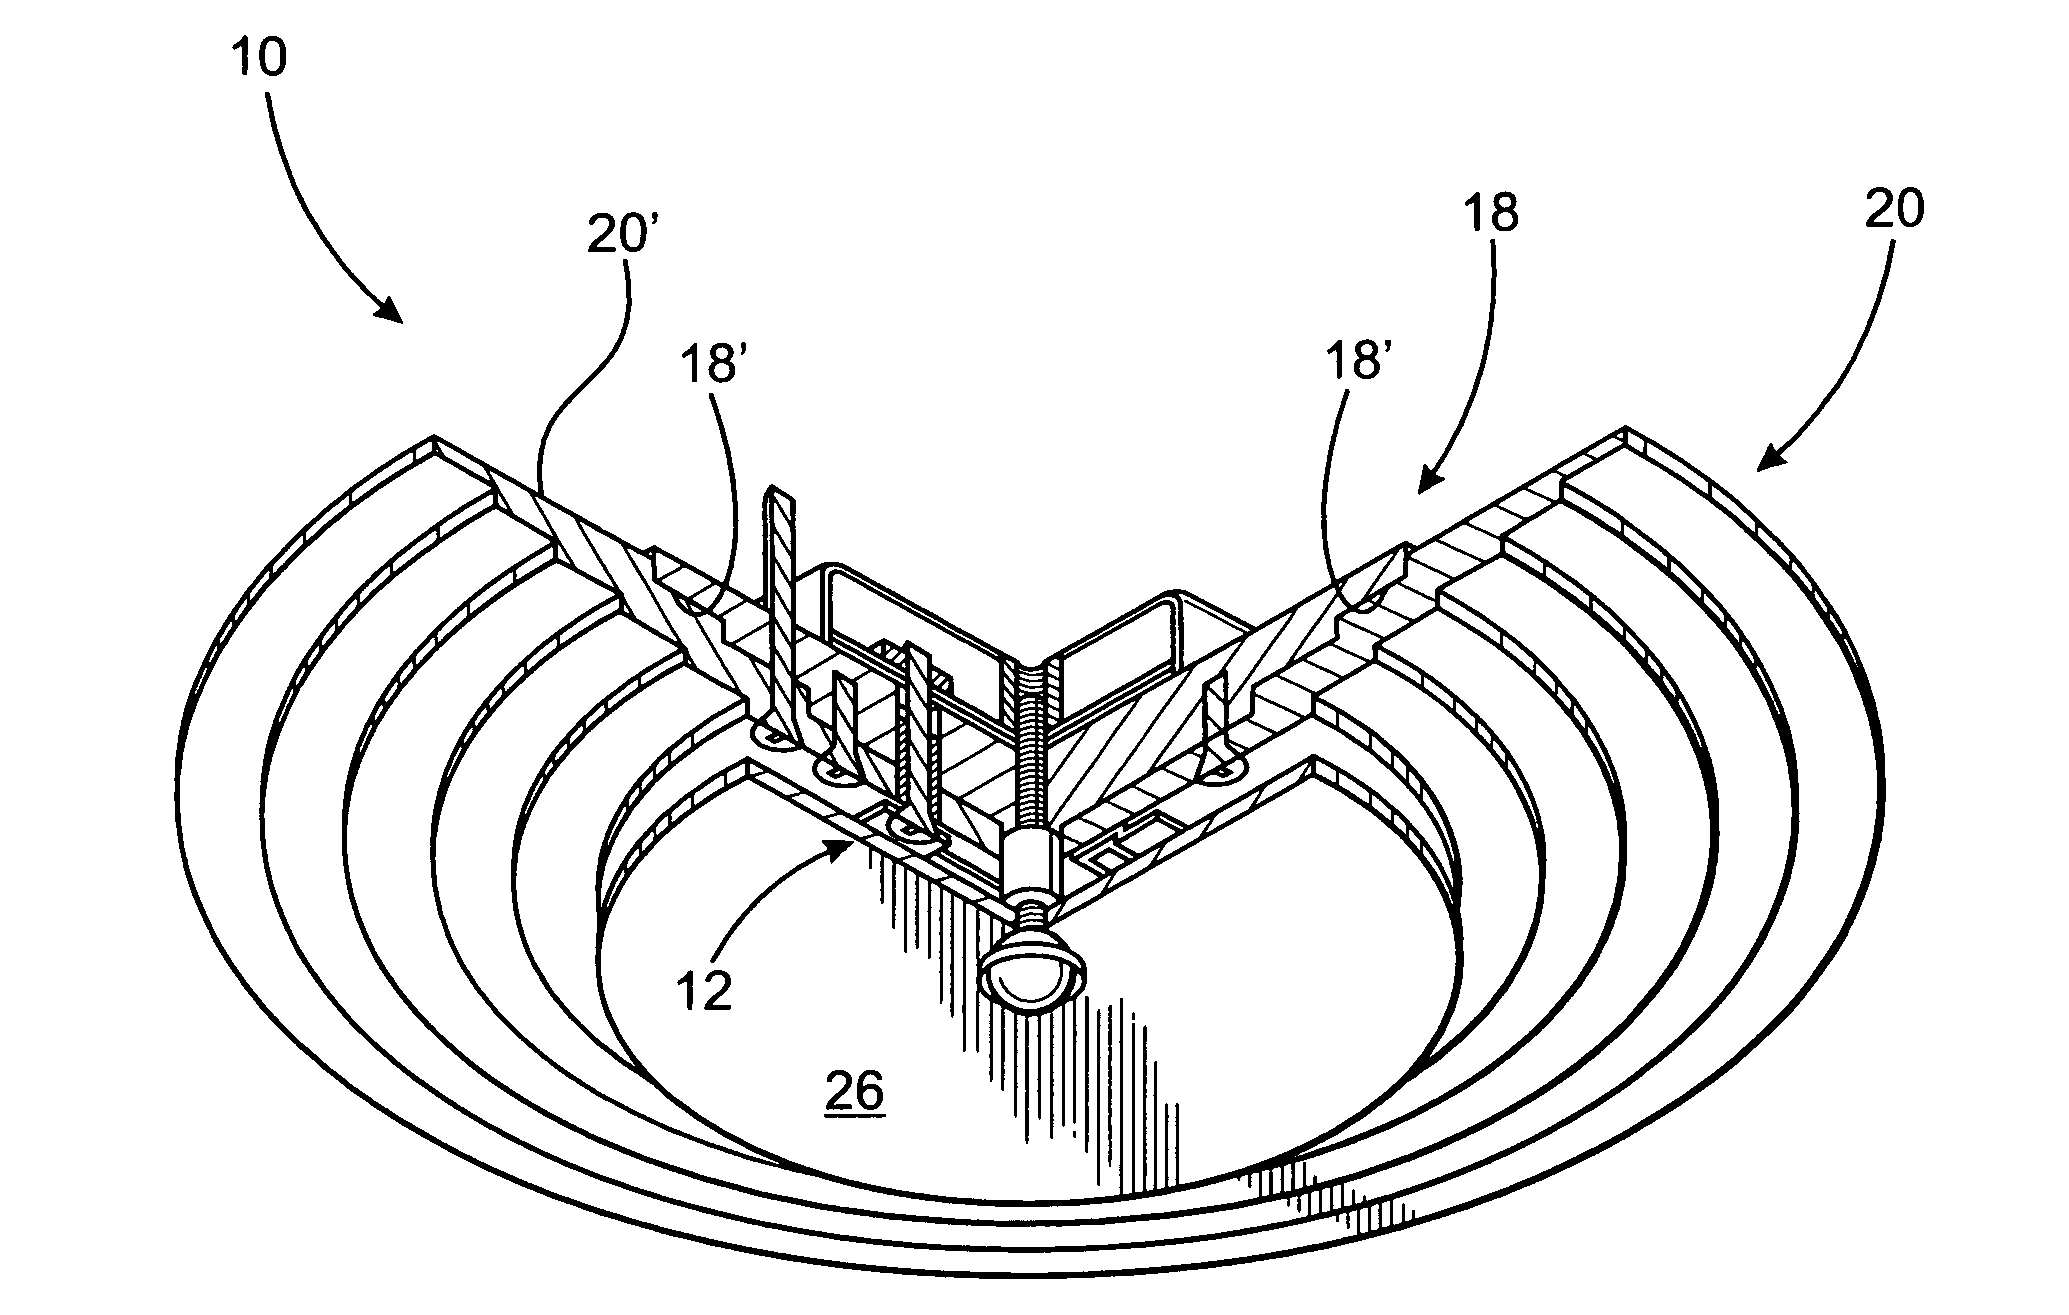 Light fixture assembly having improved heat dissipation capabilities